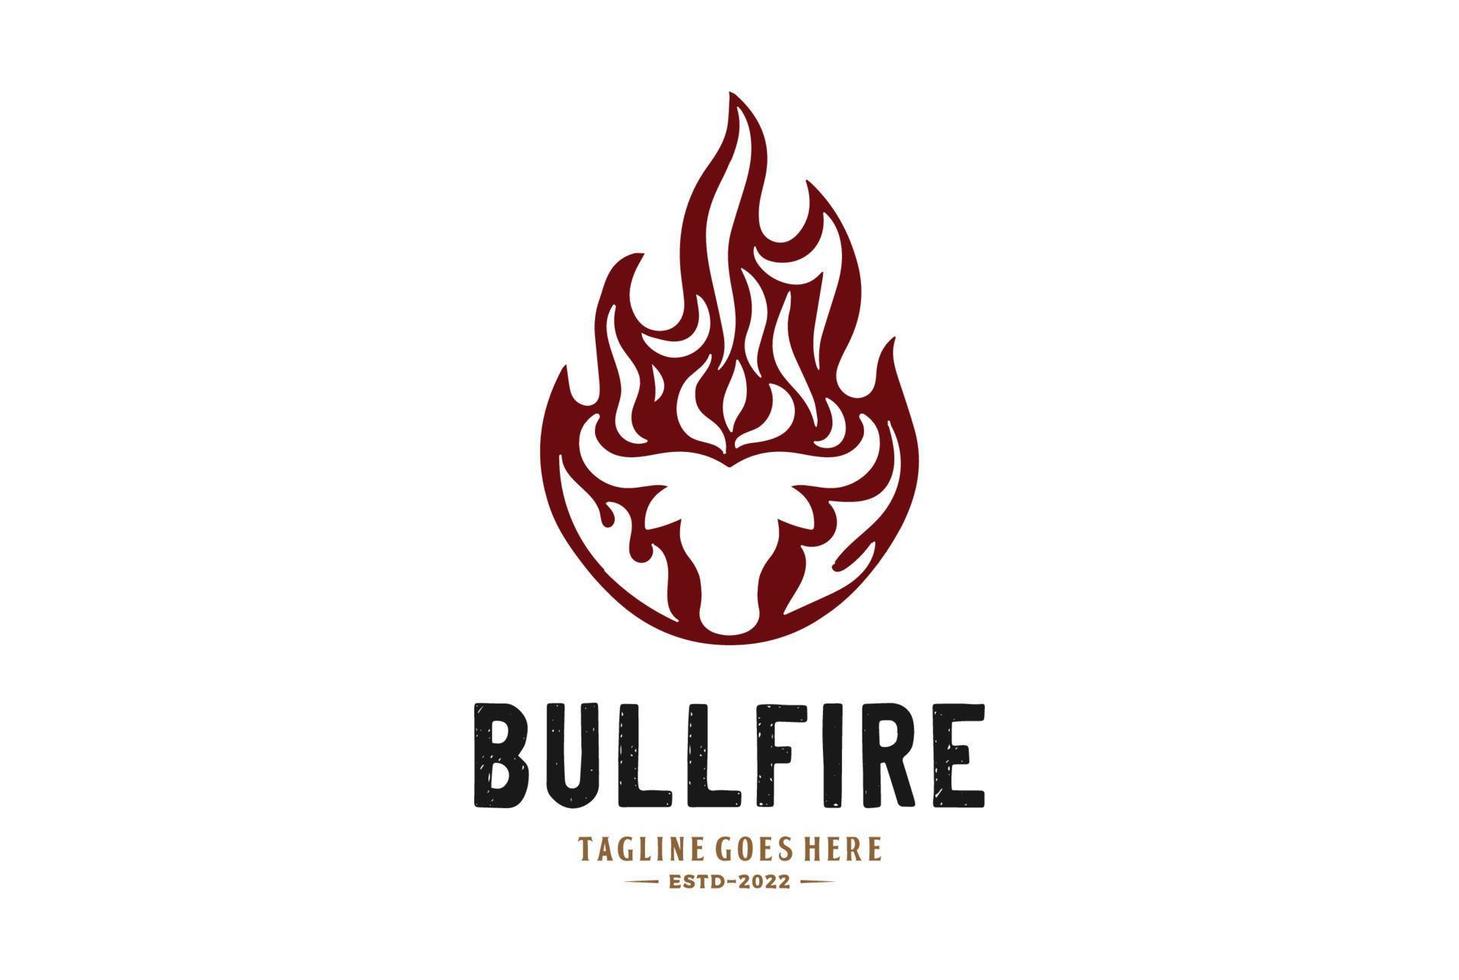 Vintage Burn Flame Fire with Angus Cow Bull Bison Longhorn Buffalo Head for BBQ Grill Logo vector